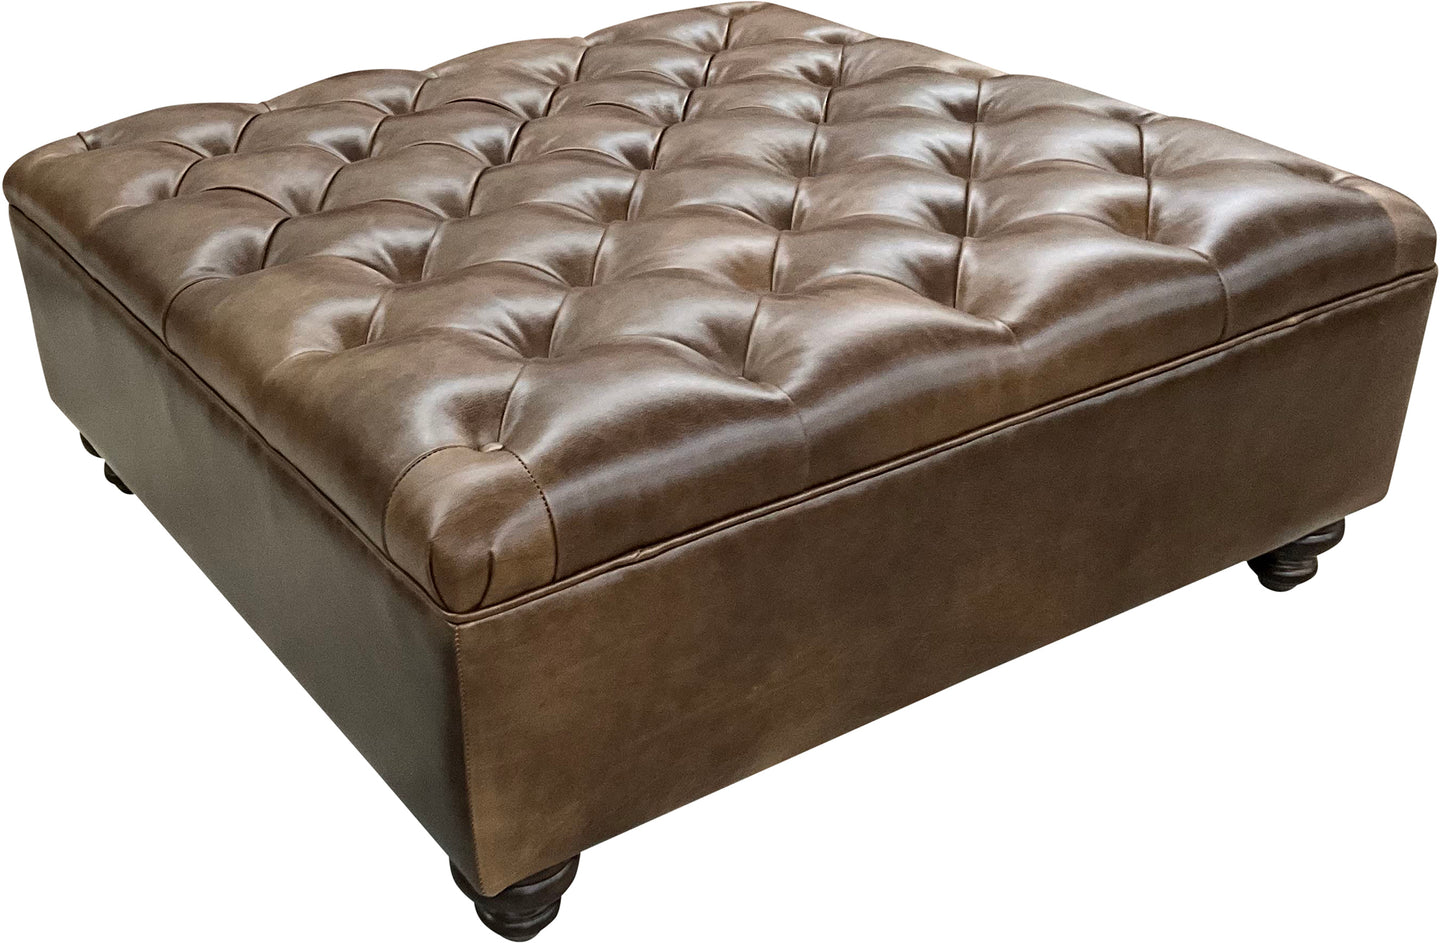 4 x 4 Large Tufted Ottoman